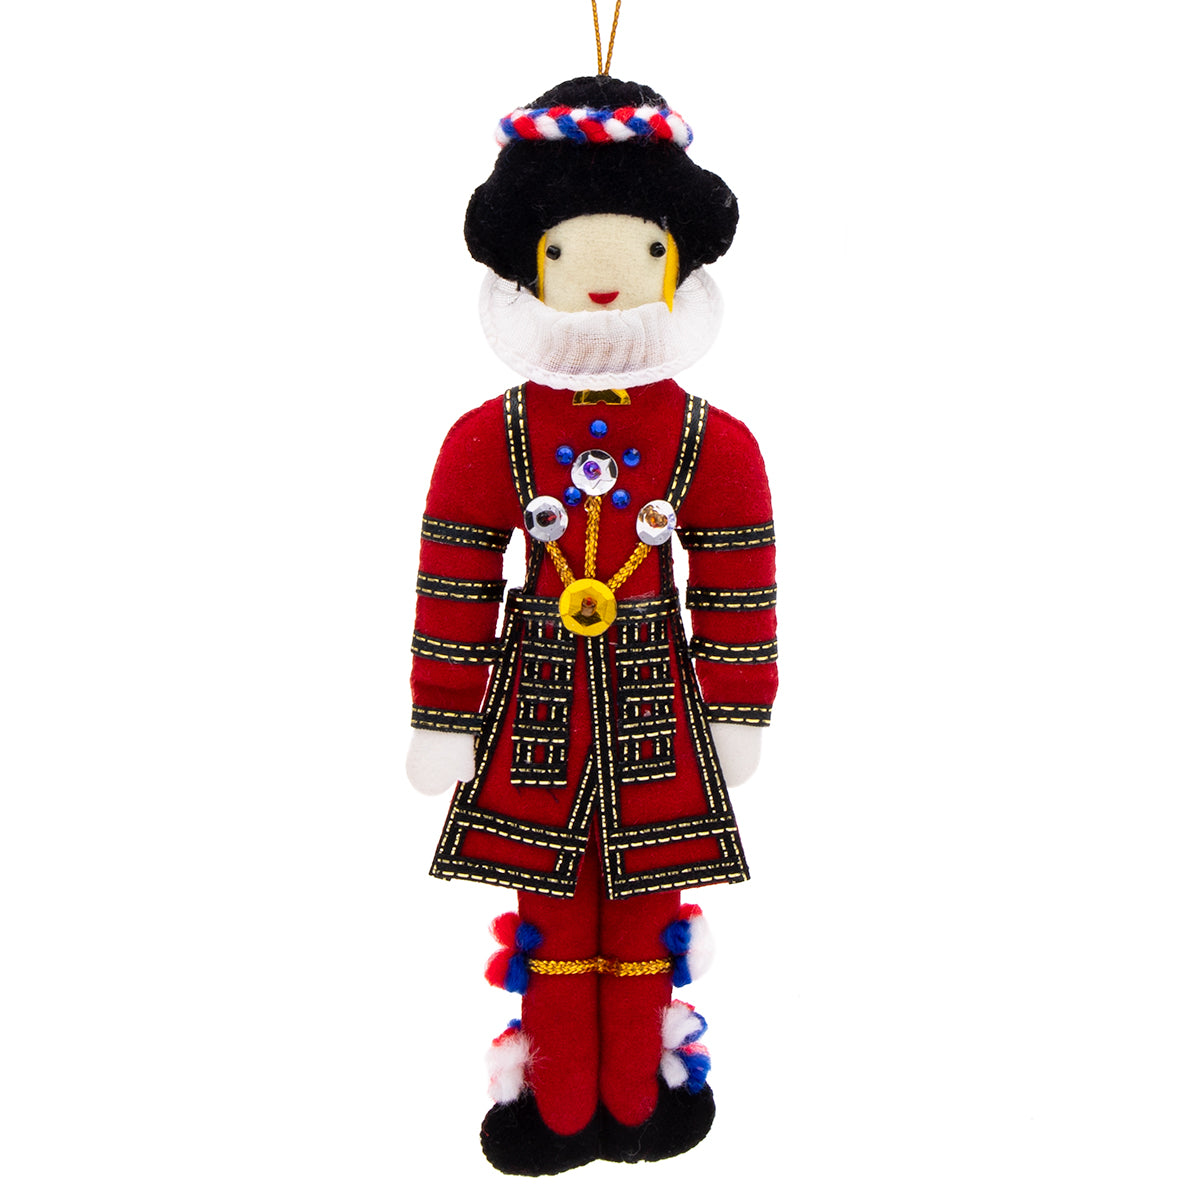 Beefeater Guard Christmas Decoration 1